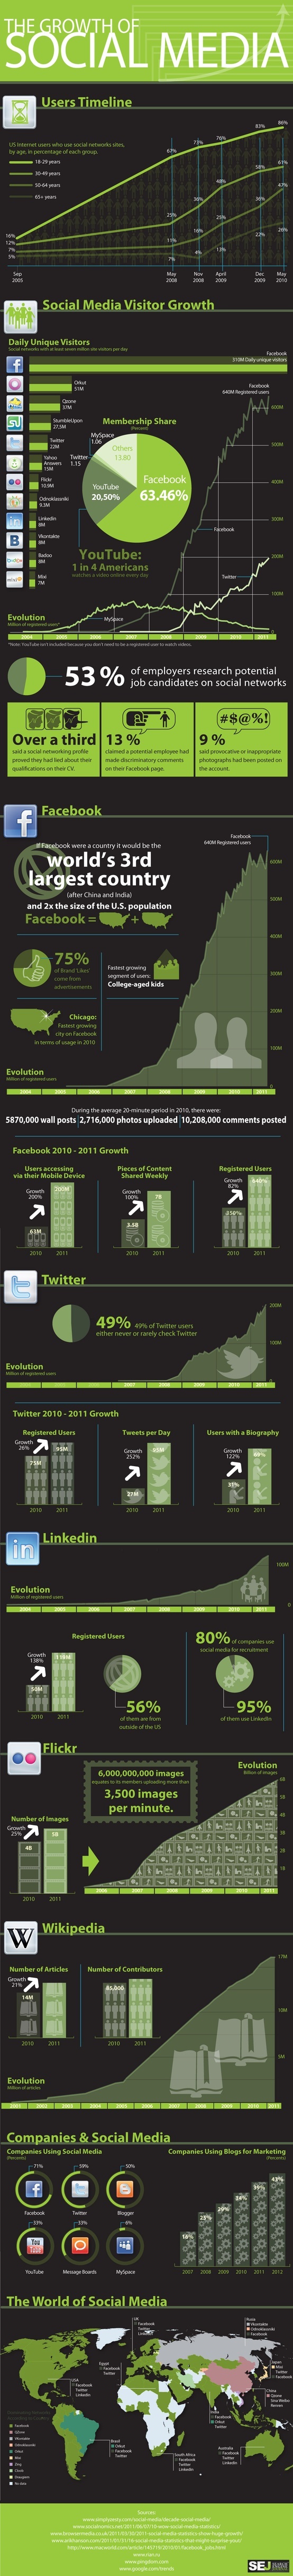 1533015285_990_Marketing-Infographic-Infographic-The-Growth-of-SocialMedia Marketing Infographic : #Infographic: The Growth of #SocialMedia.